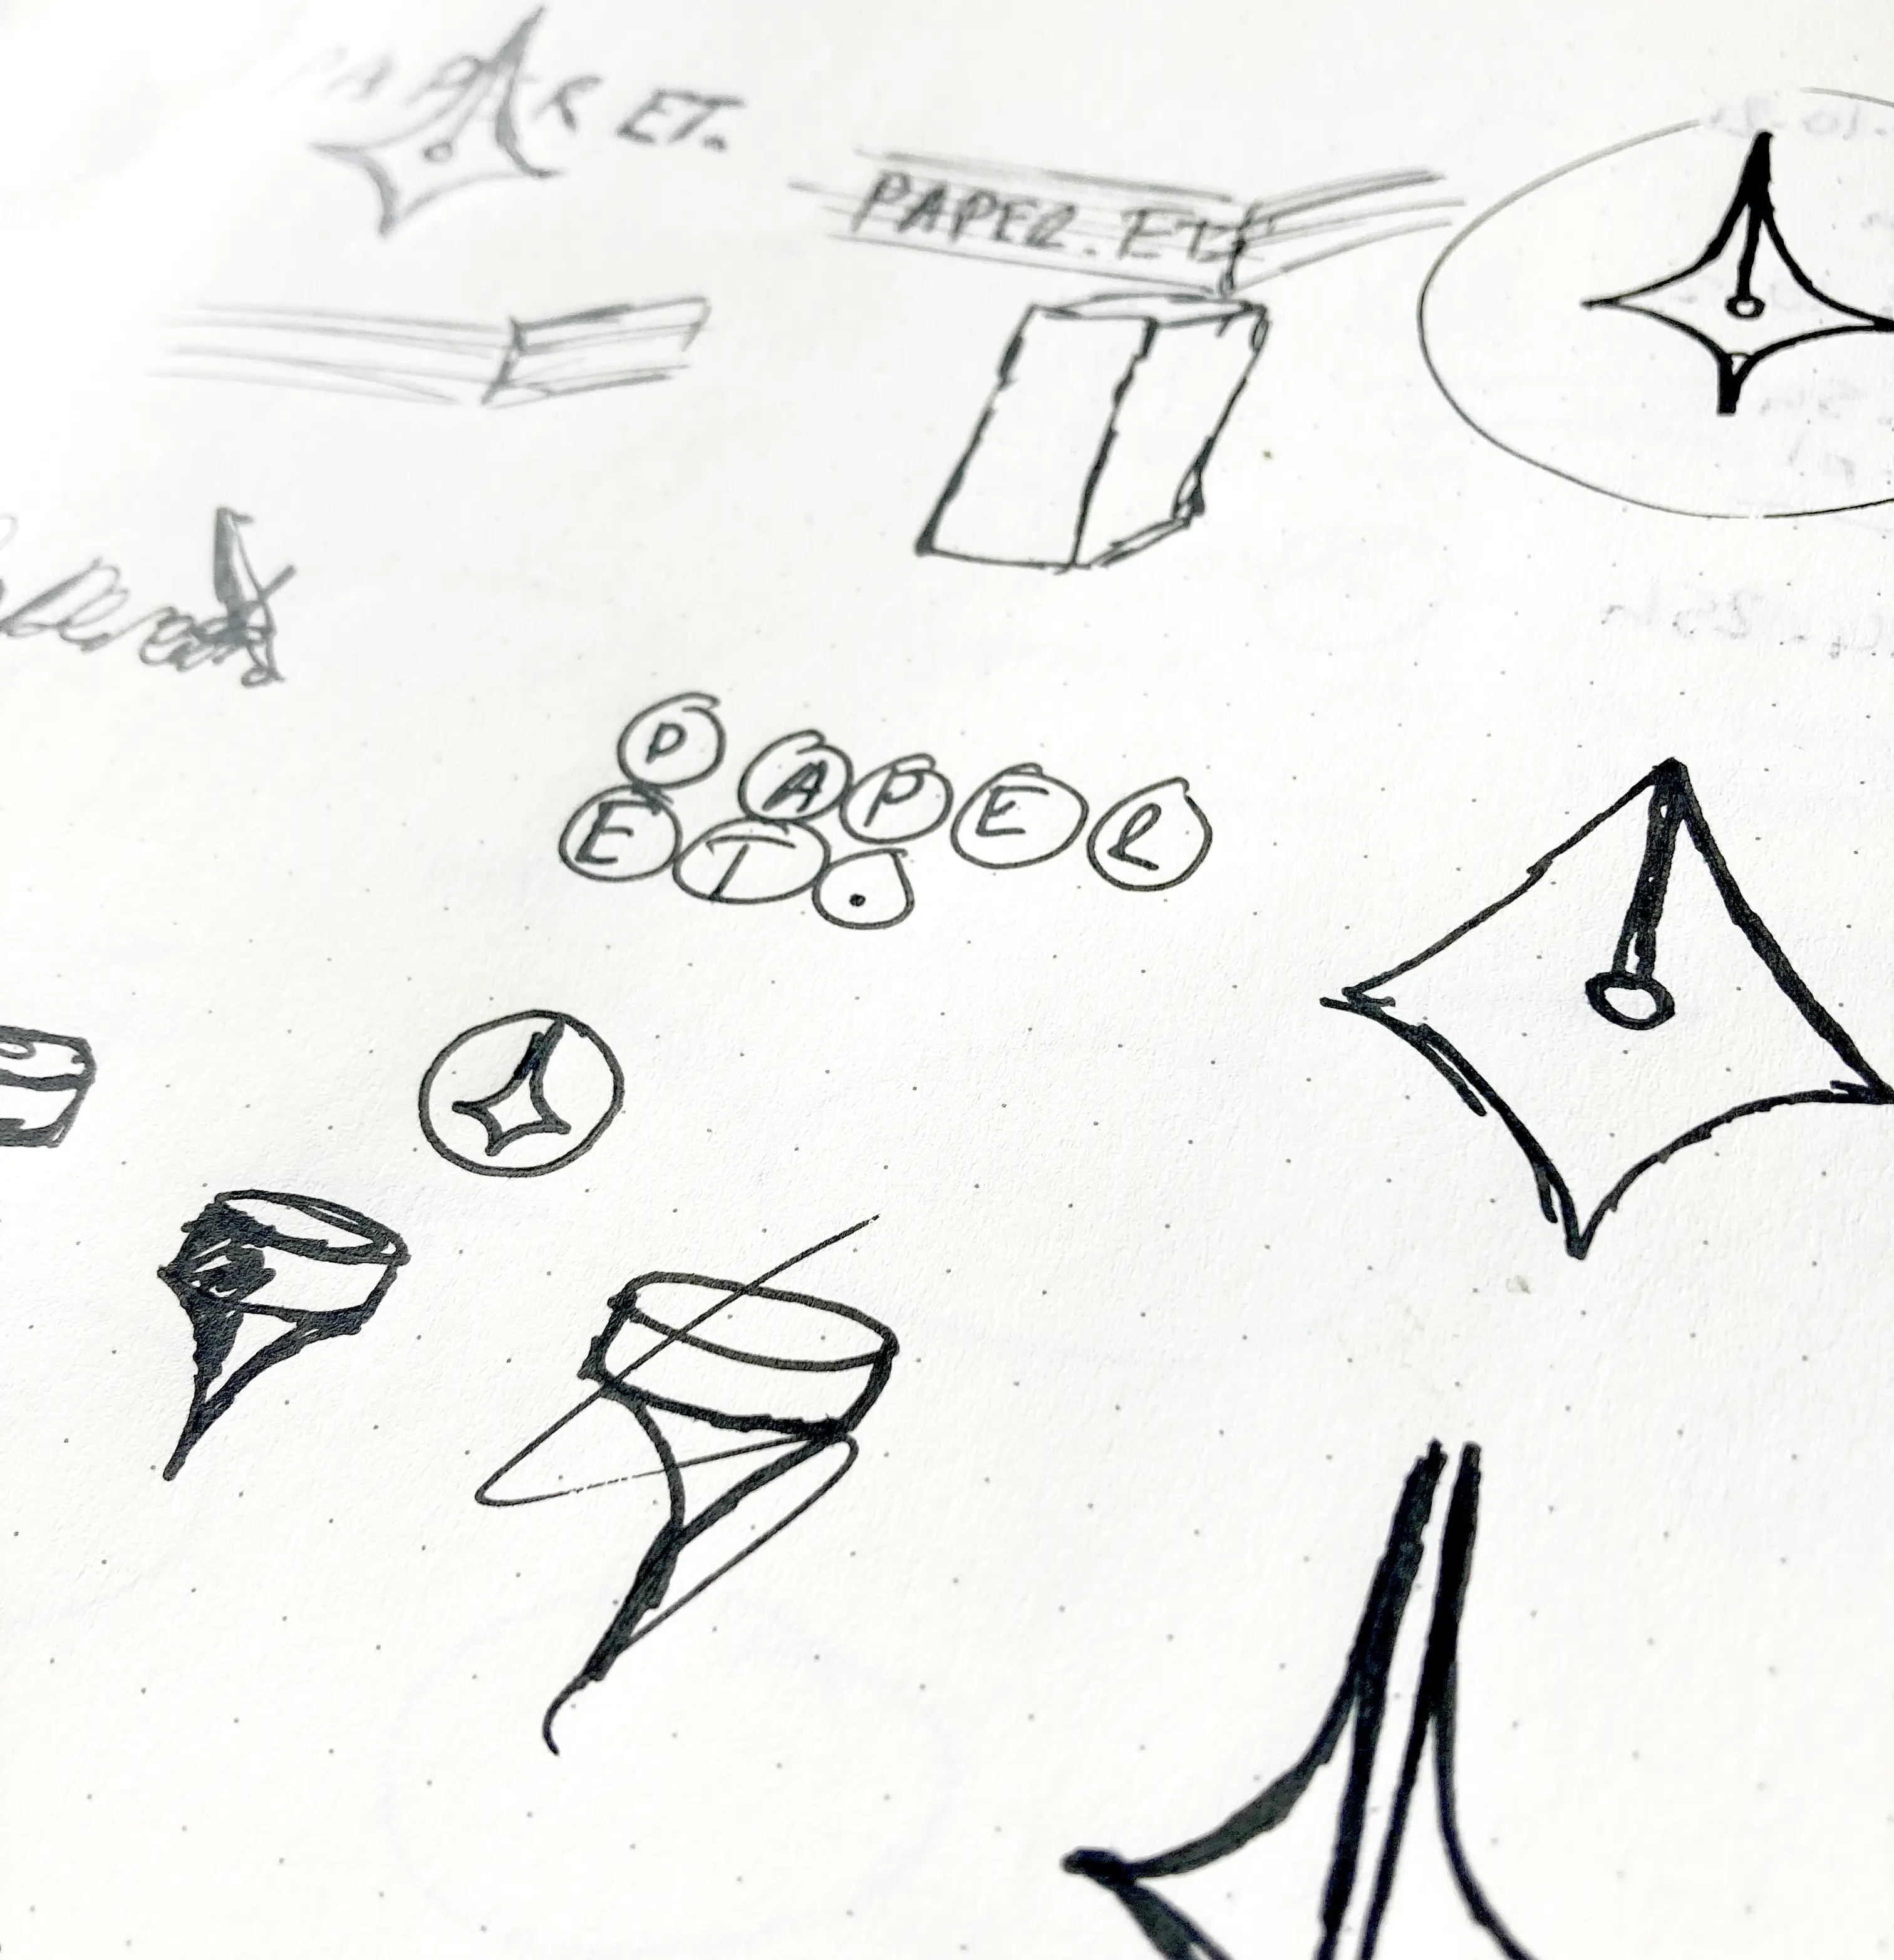 Sketches on a piece of paper of logo concepts